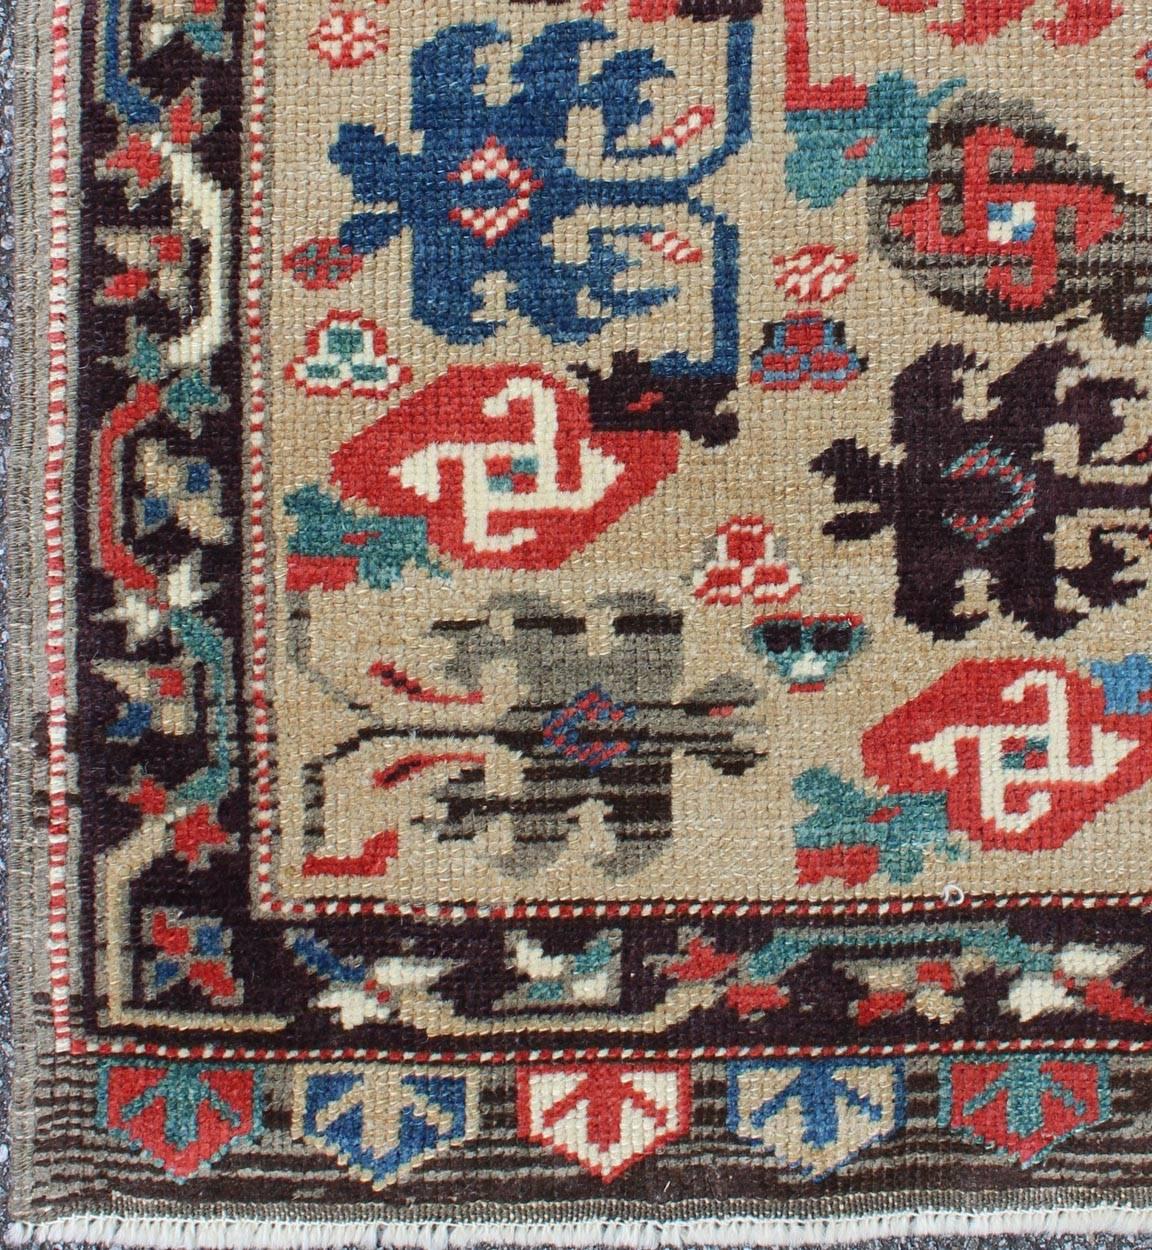 Colorful and cream background Vintage Turkish Oushak rug with all-over Tribal design, rug msd-2, country of origin / type: Turkey / Oushak, circa mid-20th century

Produced in mid-20th century Turkey, this vintage Oushak is characterized by a